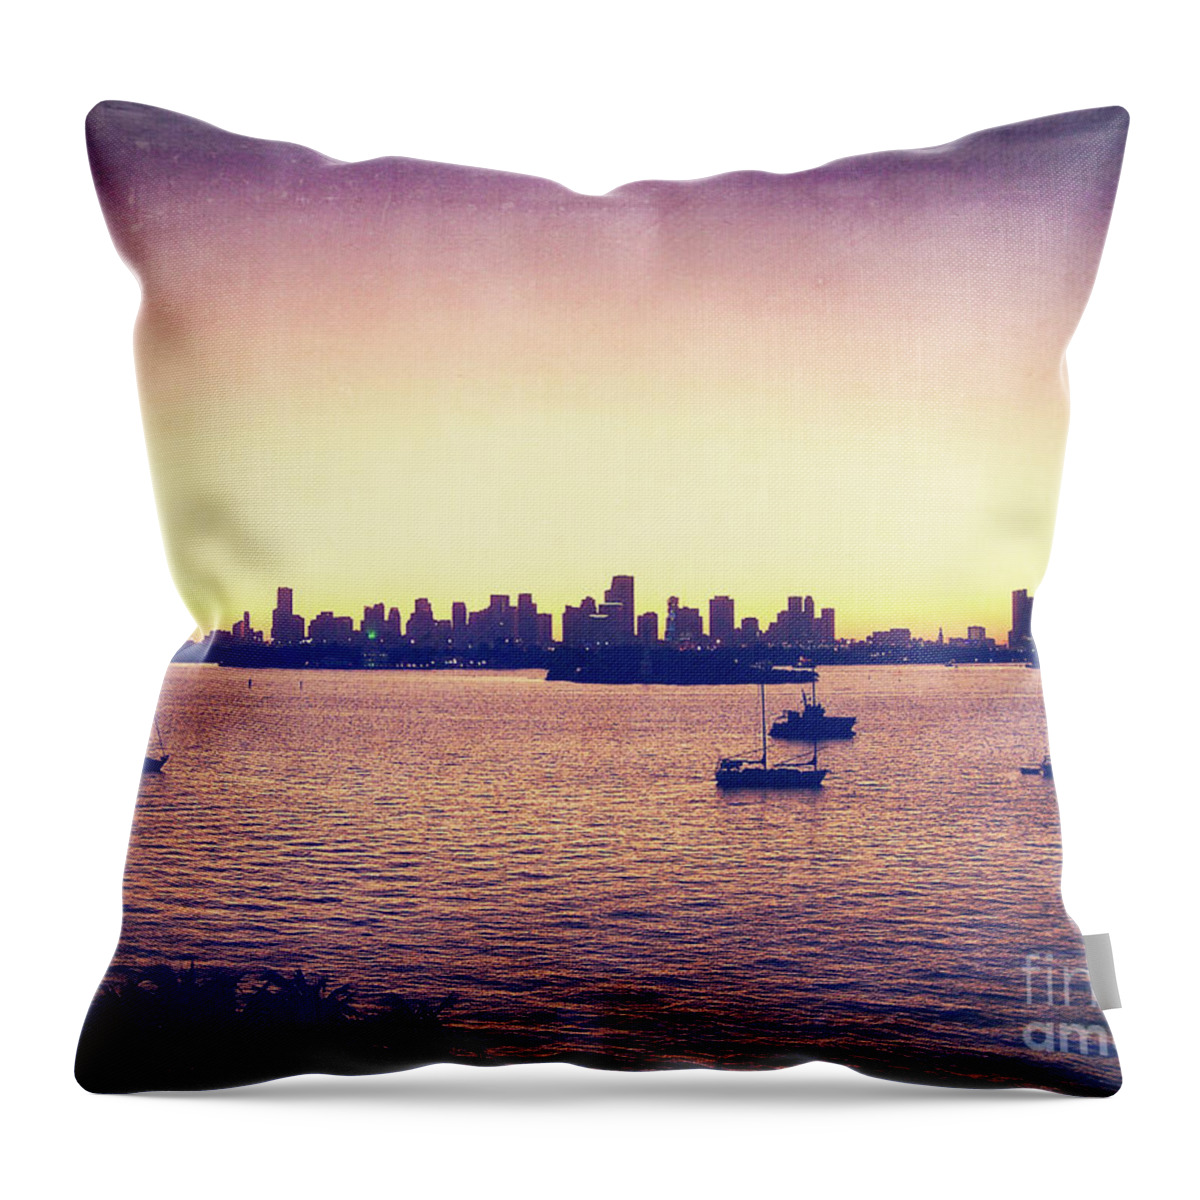 Florida Throw Pillow featuring the photograph Miami Skyline Sunset by Phil Perkins